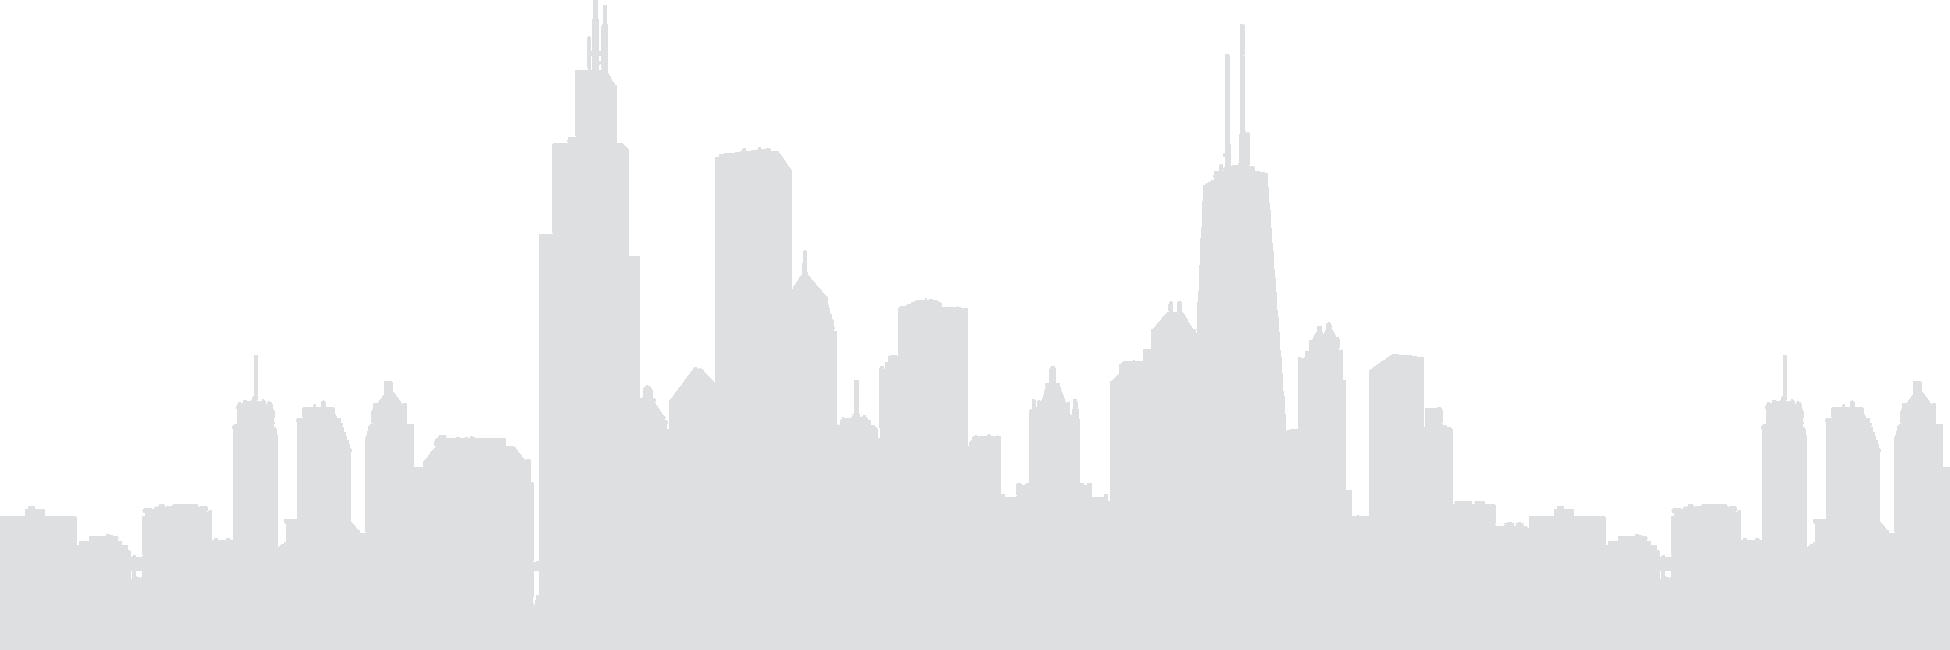 Chicago Skyline Png